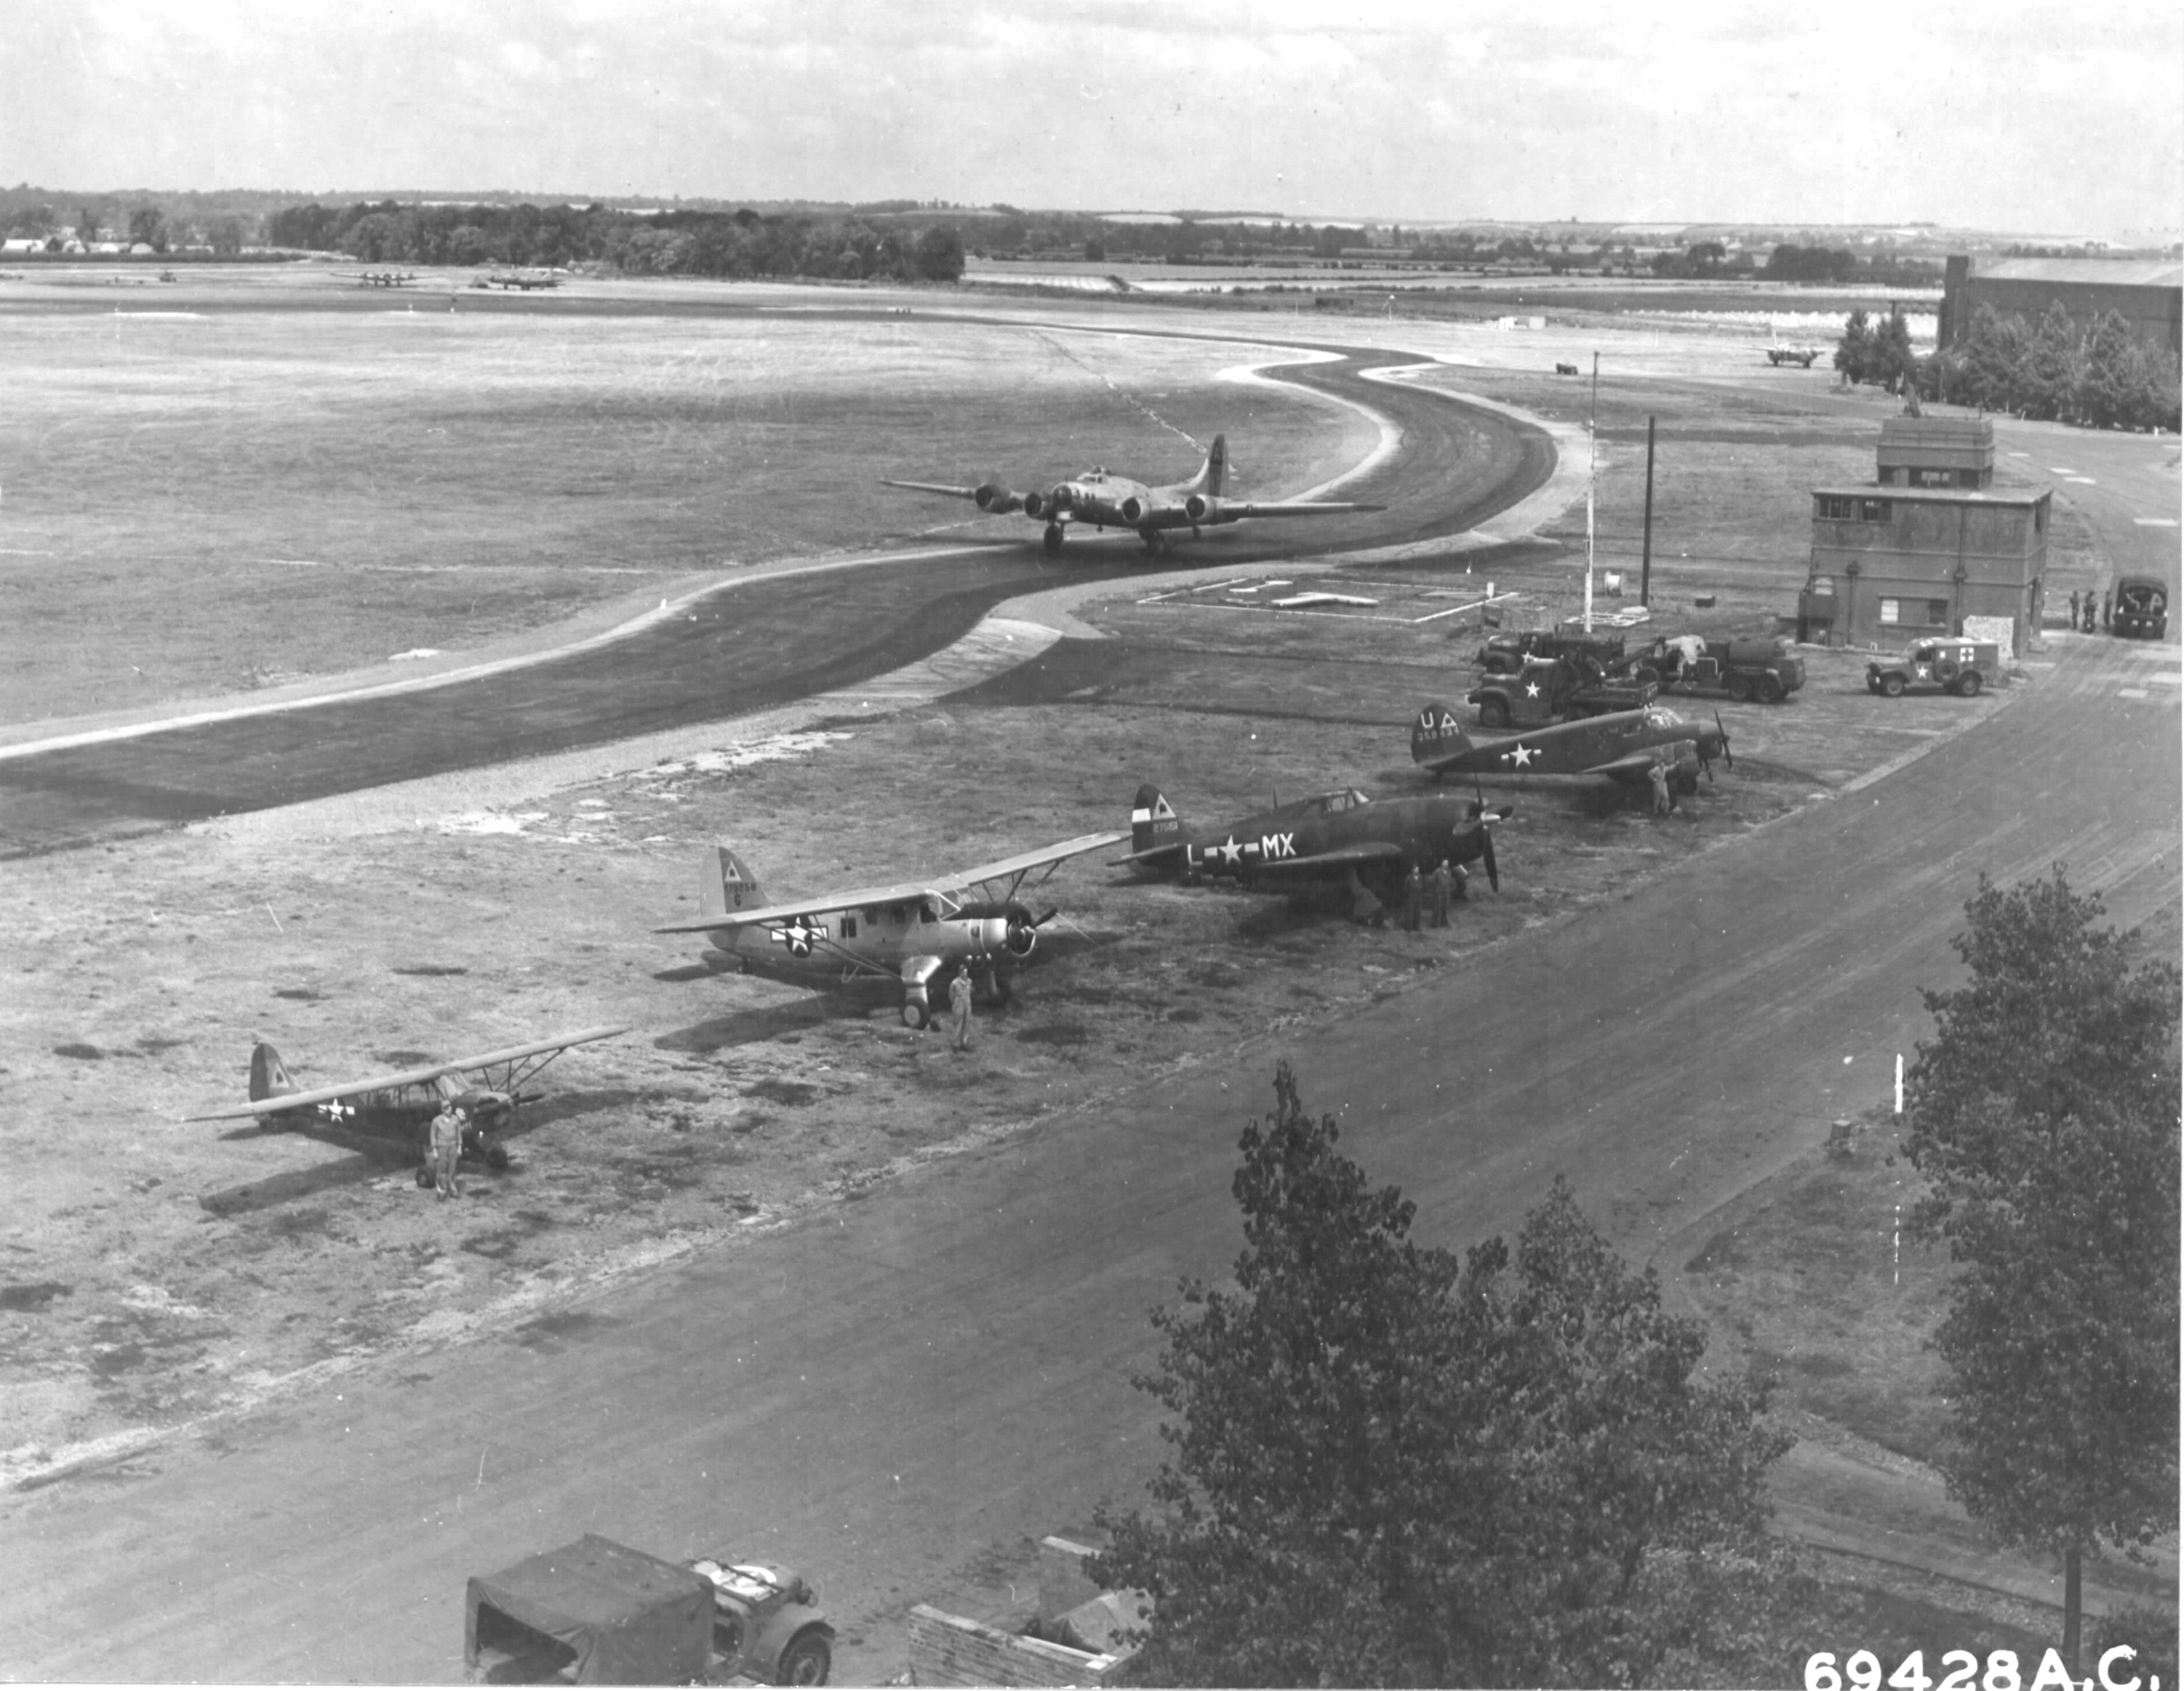 View of the control tower at RAF Bassingbourn, Cambridgeshire, England, UK, 1945. Note line of 91st Bomb Group “hack” aircraft: Piper L-4 Grasshopper, Noordyne O-64 Norseman, P-47 Thunderbolt, and Cessna UC-78 Bobcat.